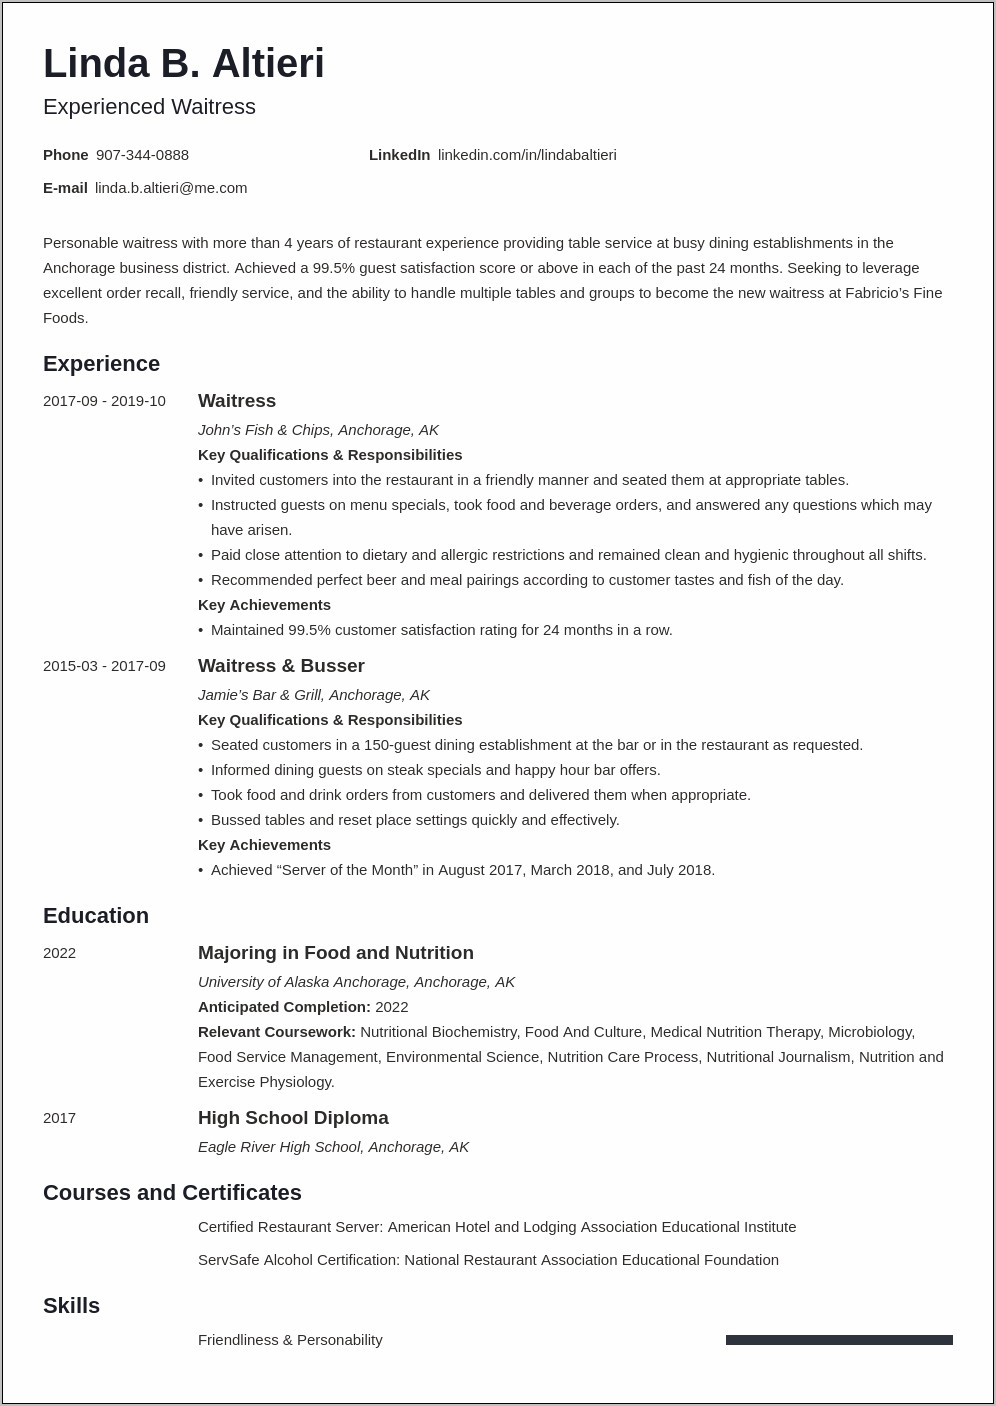 Resume Work Experience Examples For Waitress